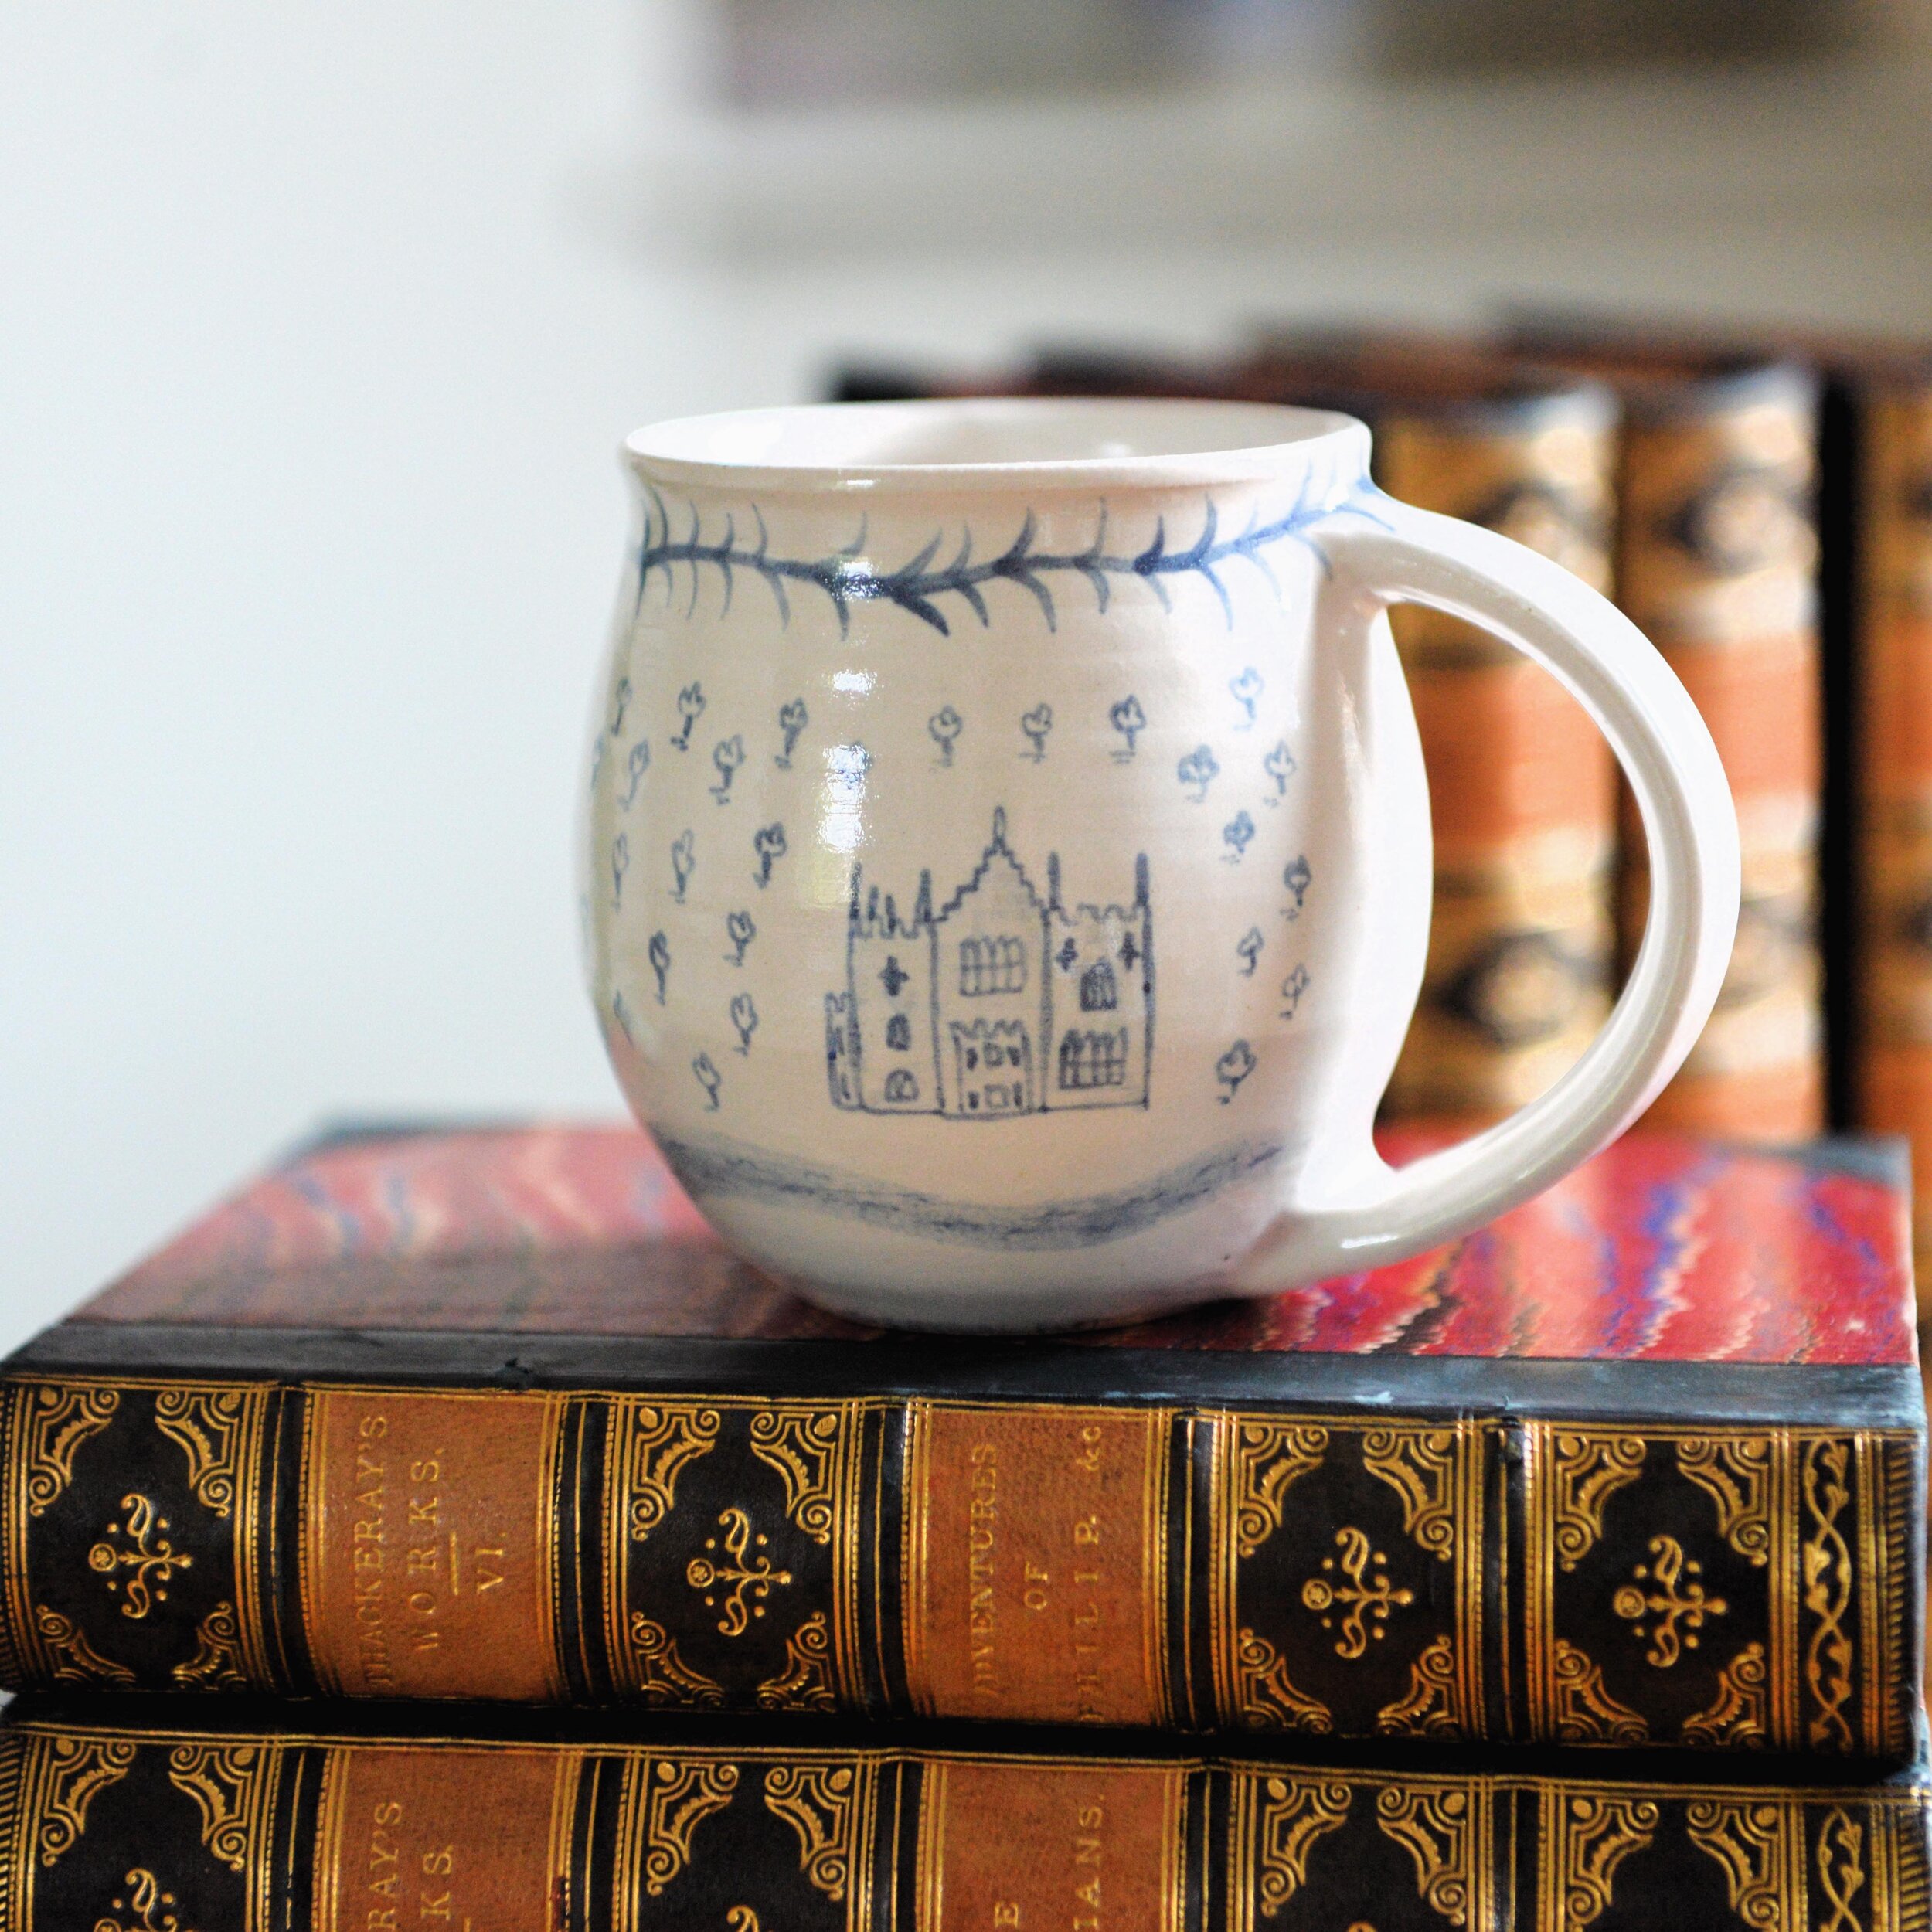 And here is the third piece in my @waterstones tea set - a teacup with Endellion House painted on the side. After Bonnie&rsquo;s trick goes wrong and a gentleman lies in a pool of blood at her feet, she needs to disappear. Crawford secures her a posi